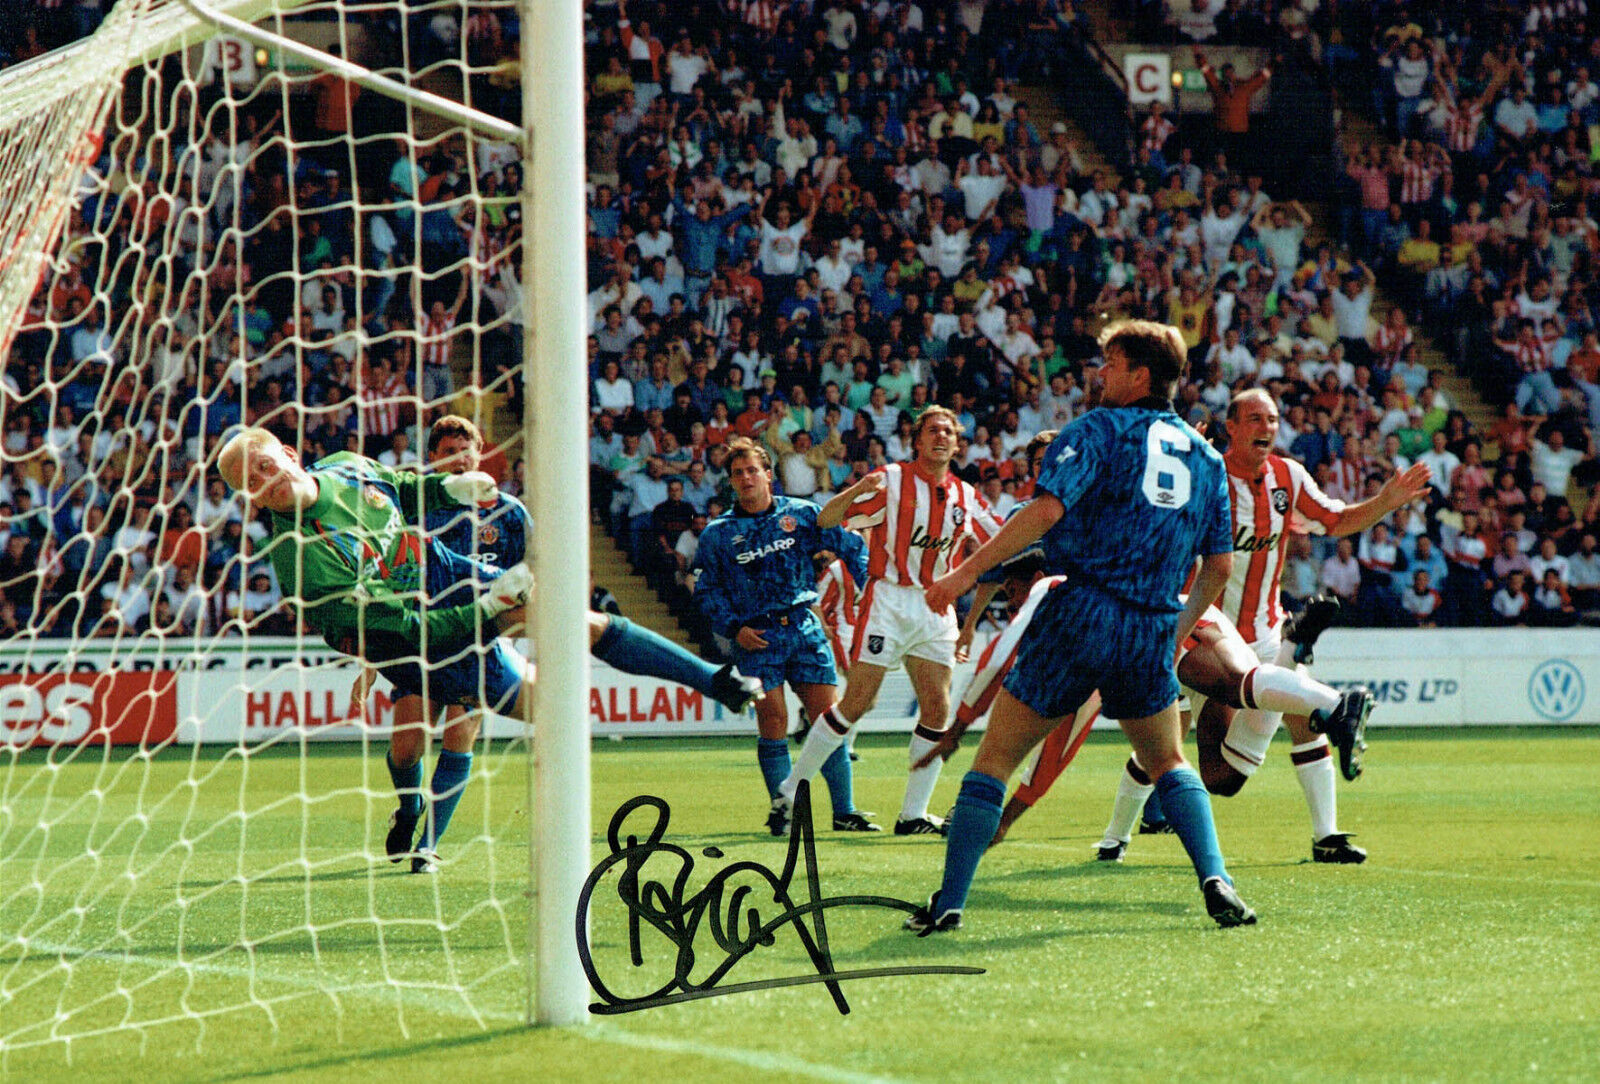 Brian DEANE SIGNED Autograph 12x8 Photo Poster painting 2 AFTAL COA Sheffield United Blades SUFC